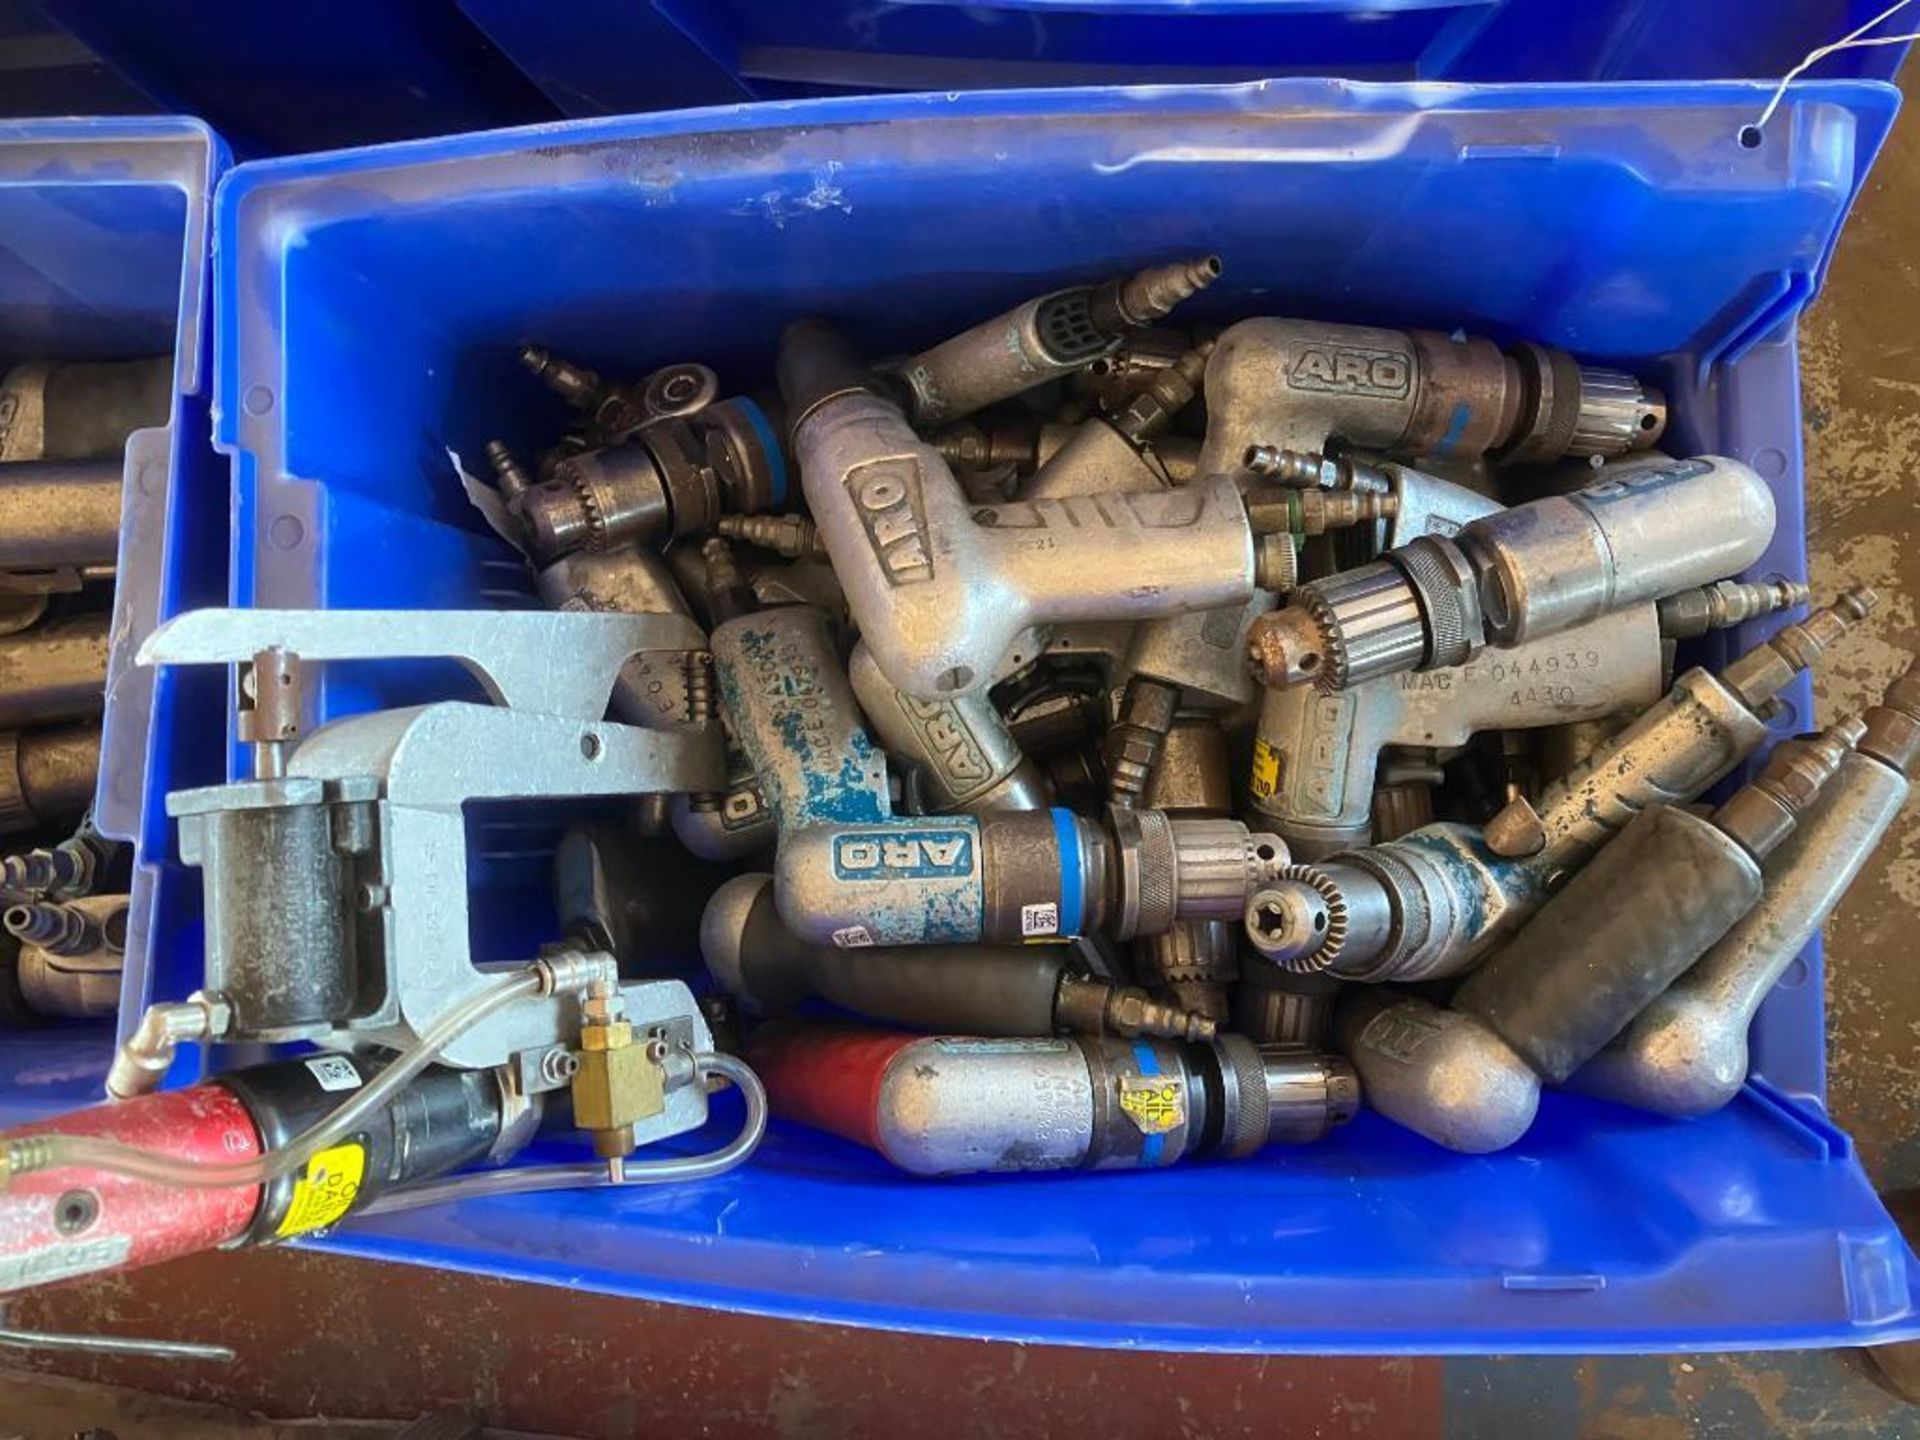 Approx. (25) Assorted Pneumatic Tools